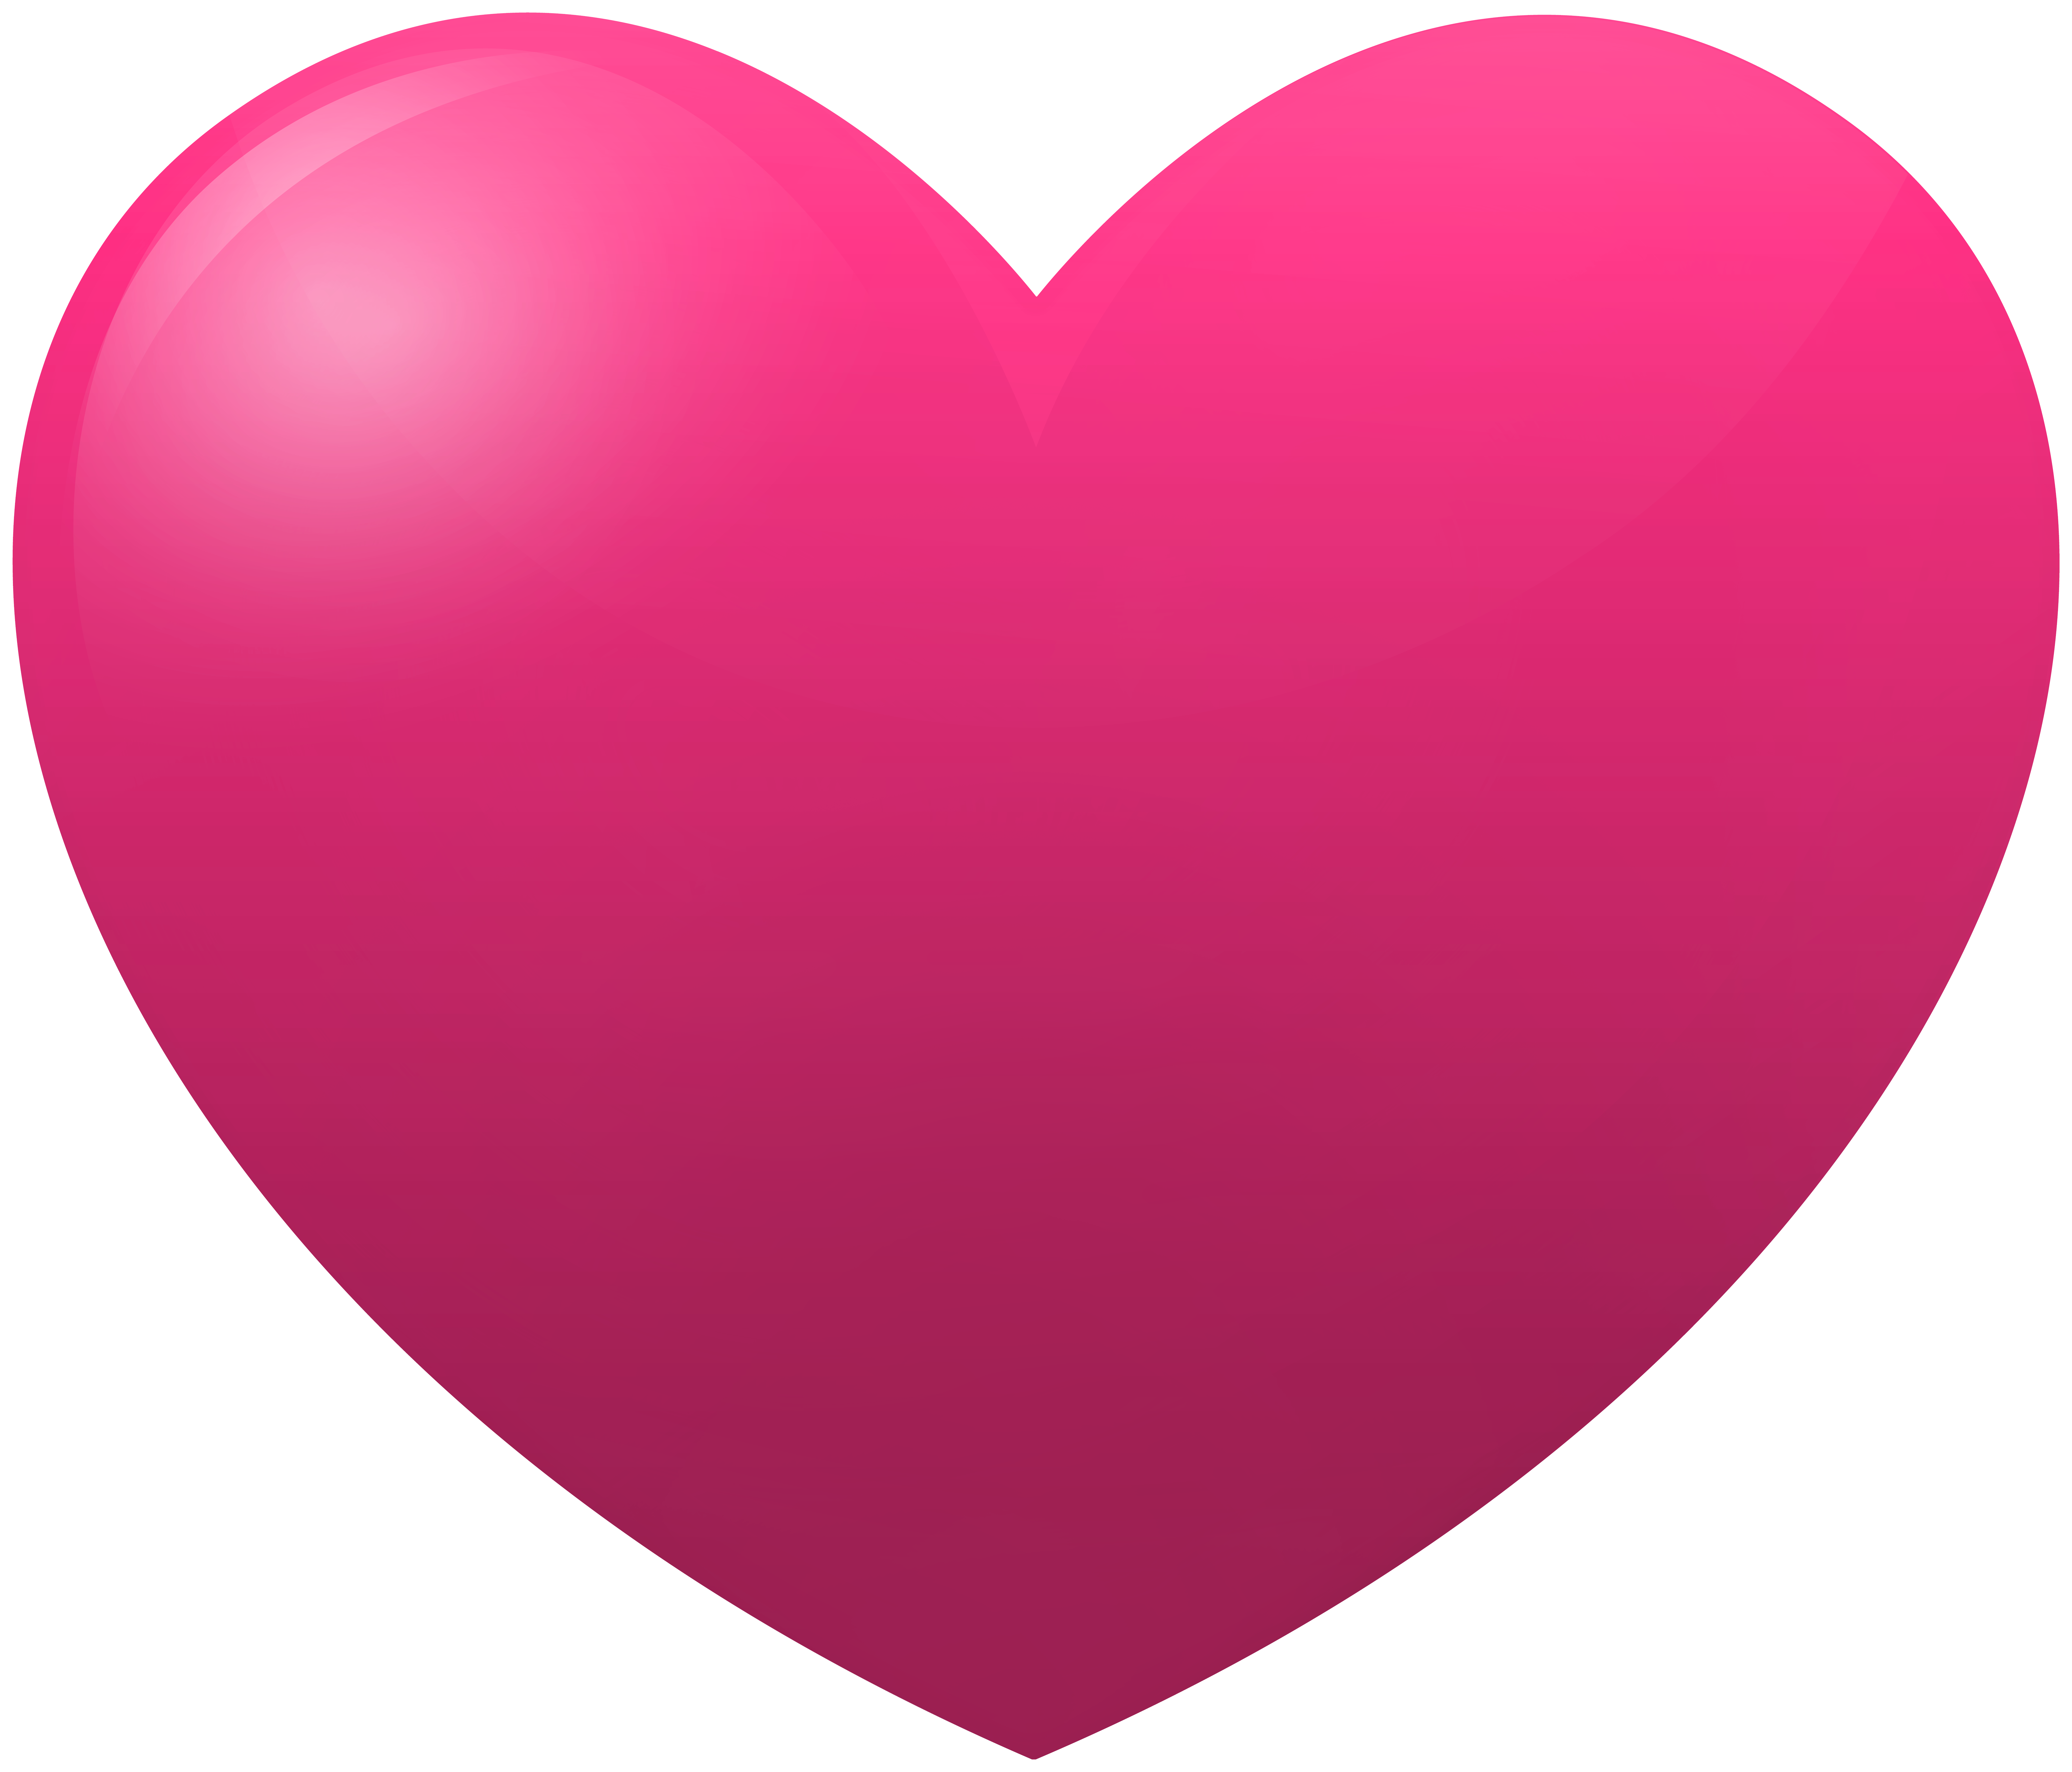 Pink Heart Transparent PNG Clipart​ | Gallery Yopriceville - High-Quality  Free Images and Transparent PNG Clipart